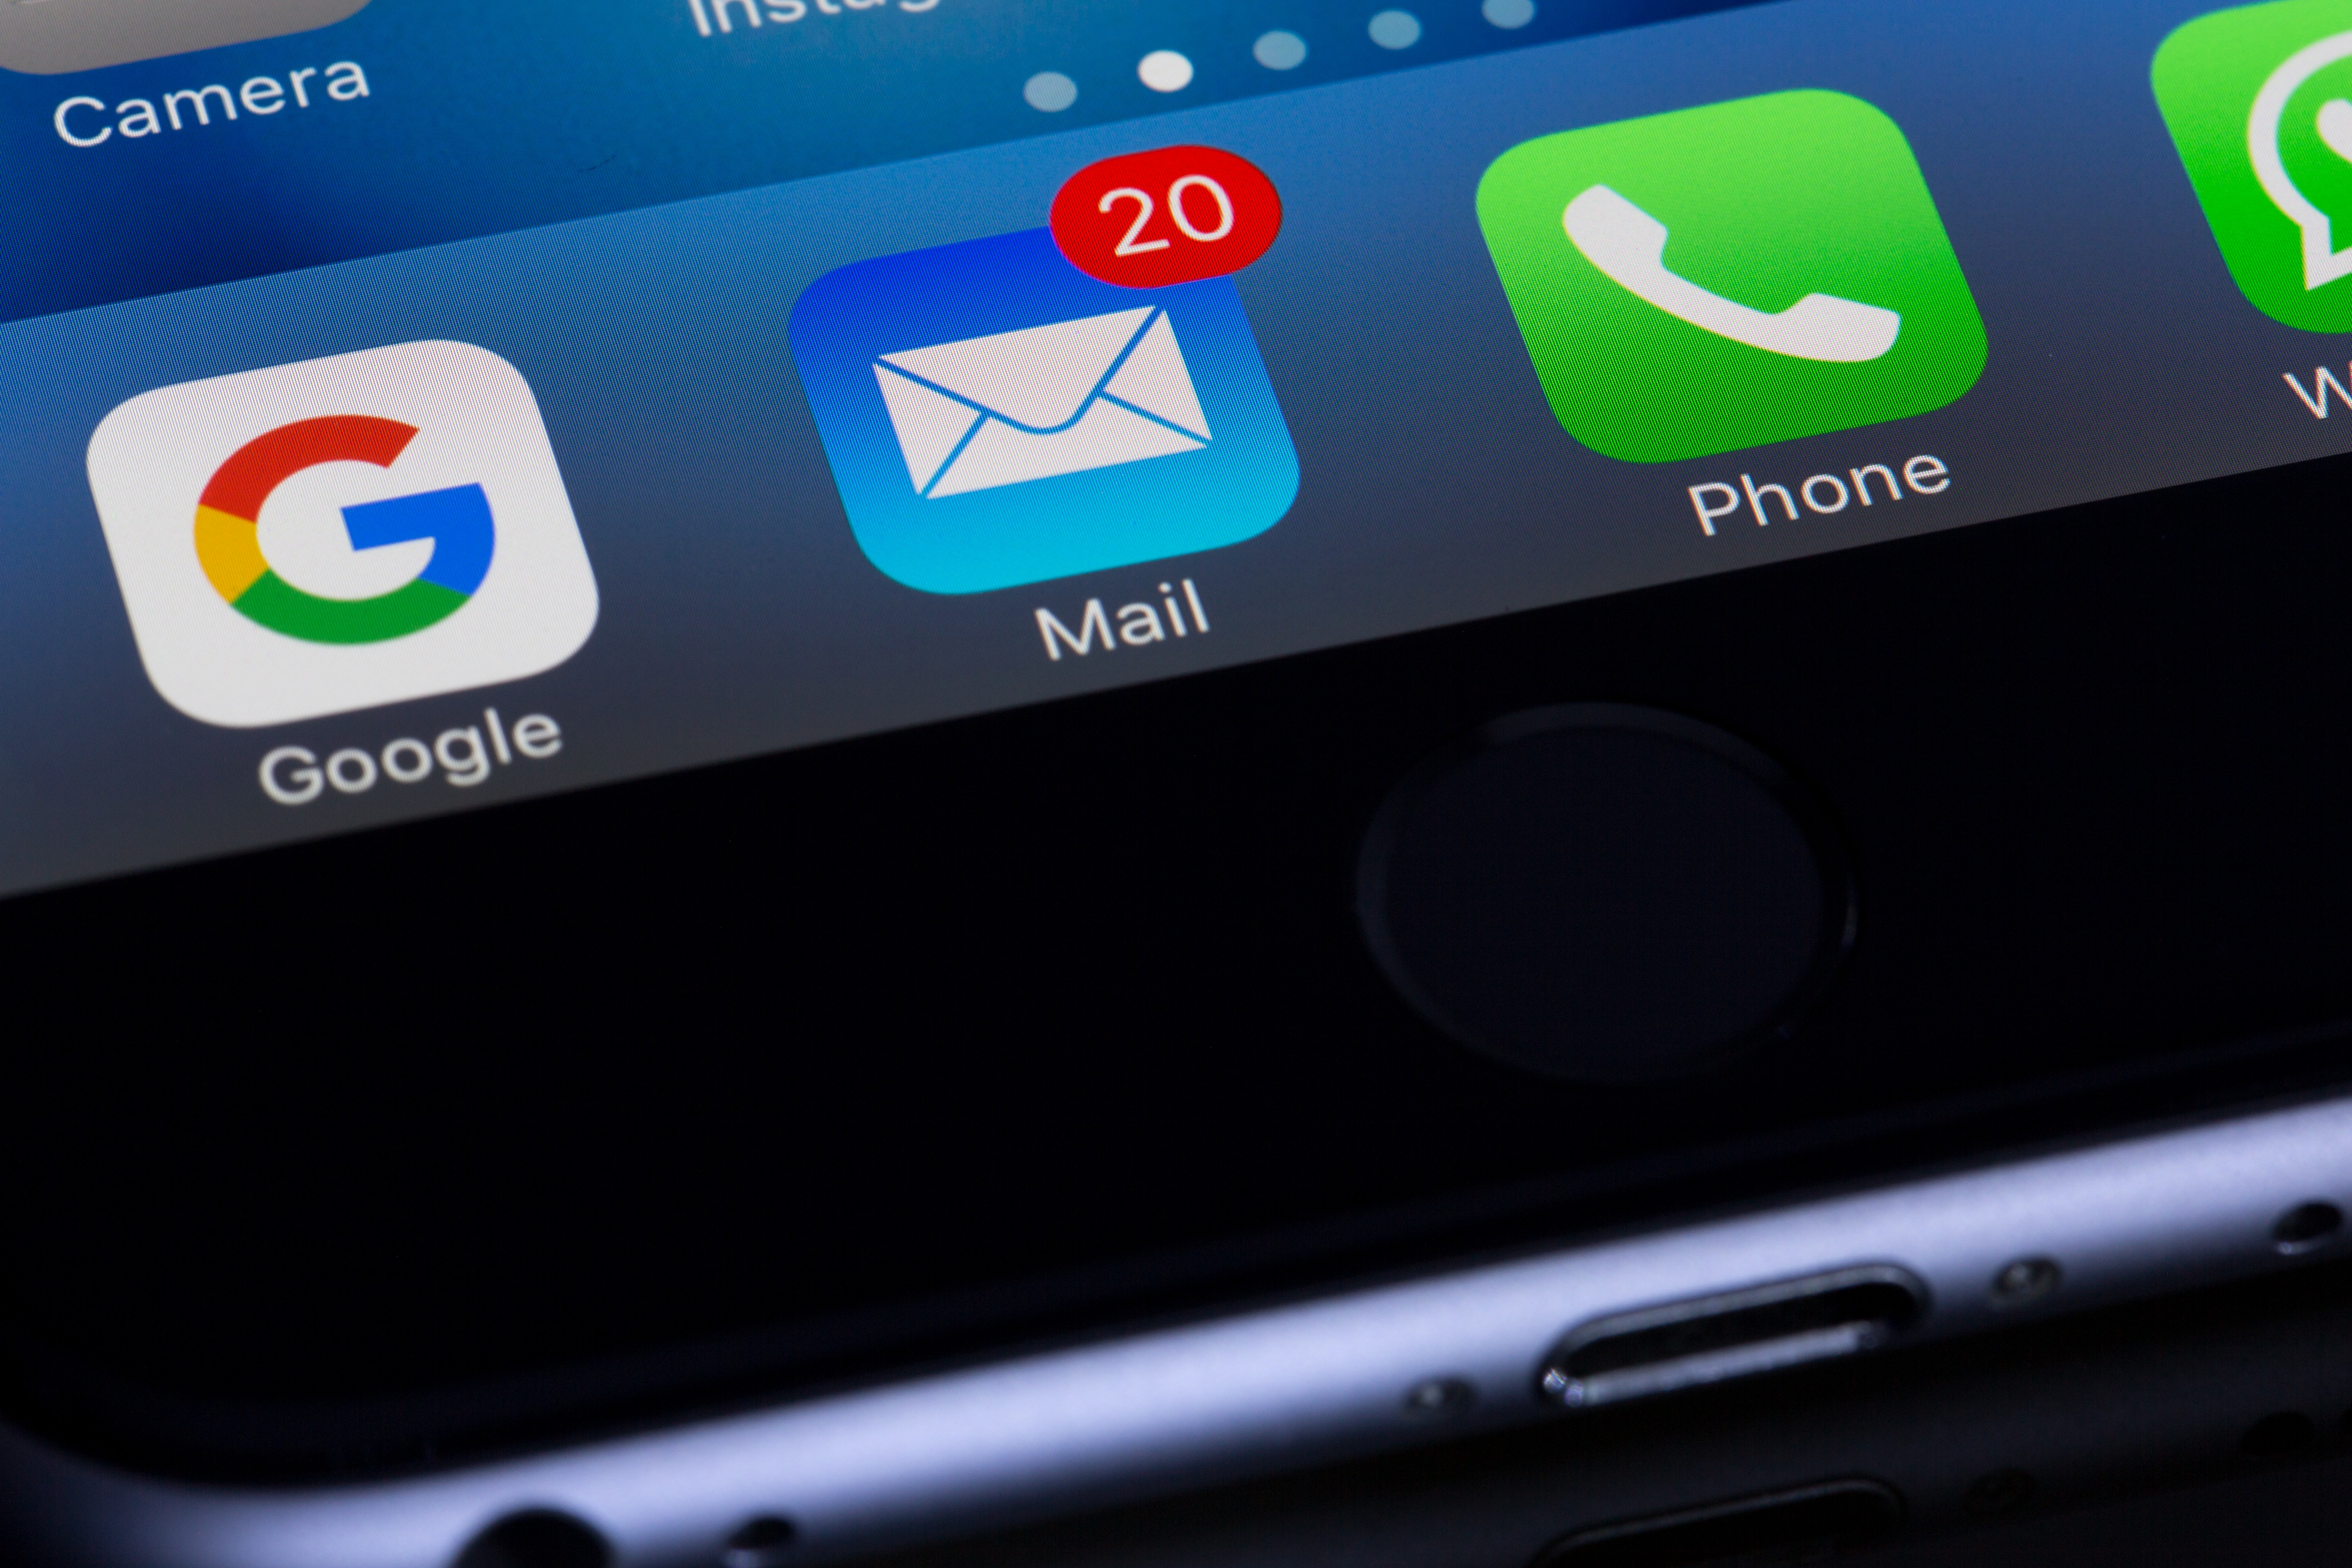 Email icon on smartphone shows number of unread emails 